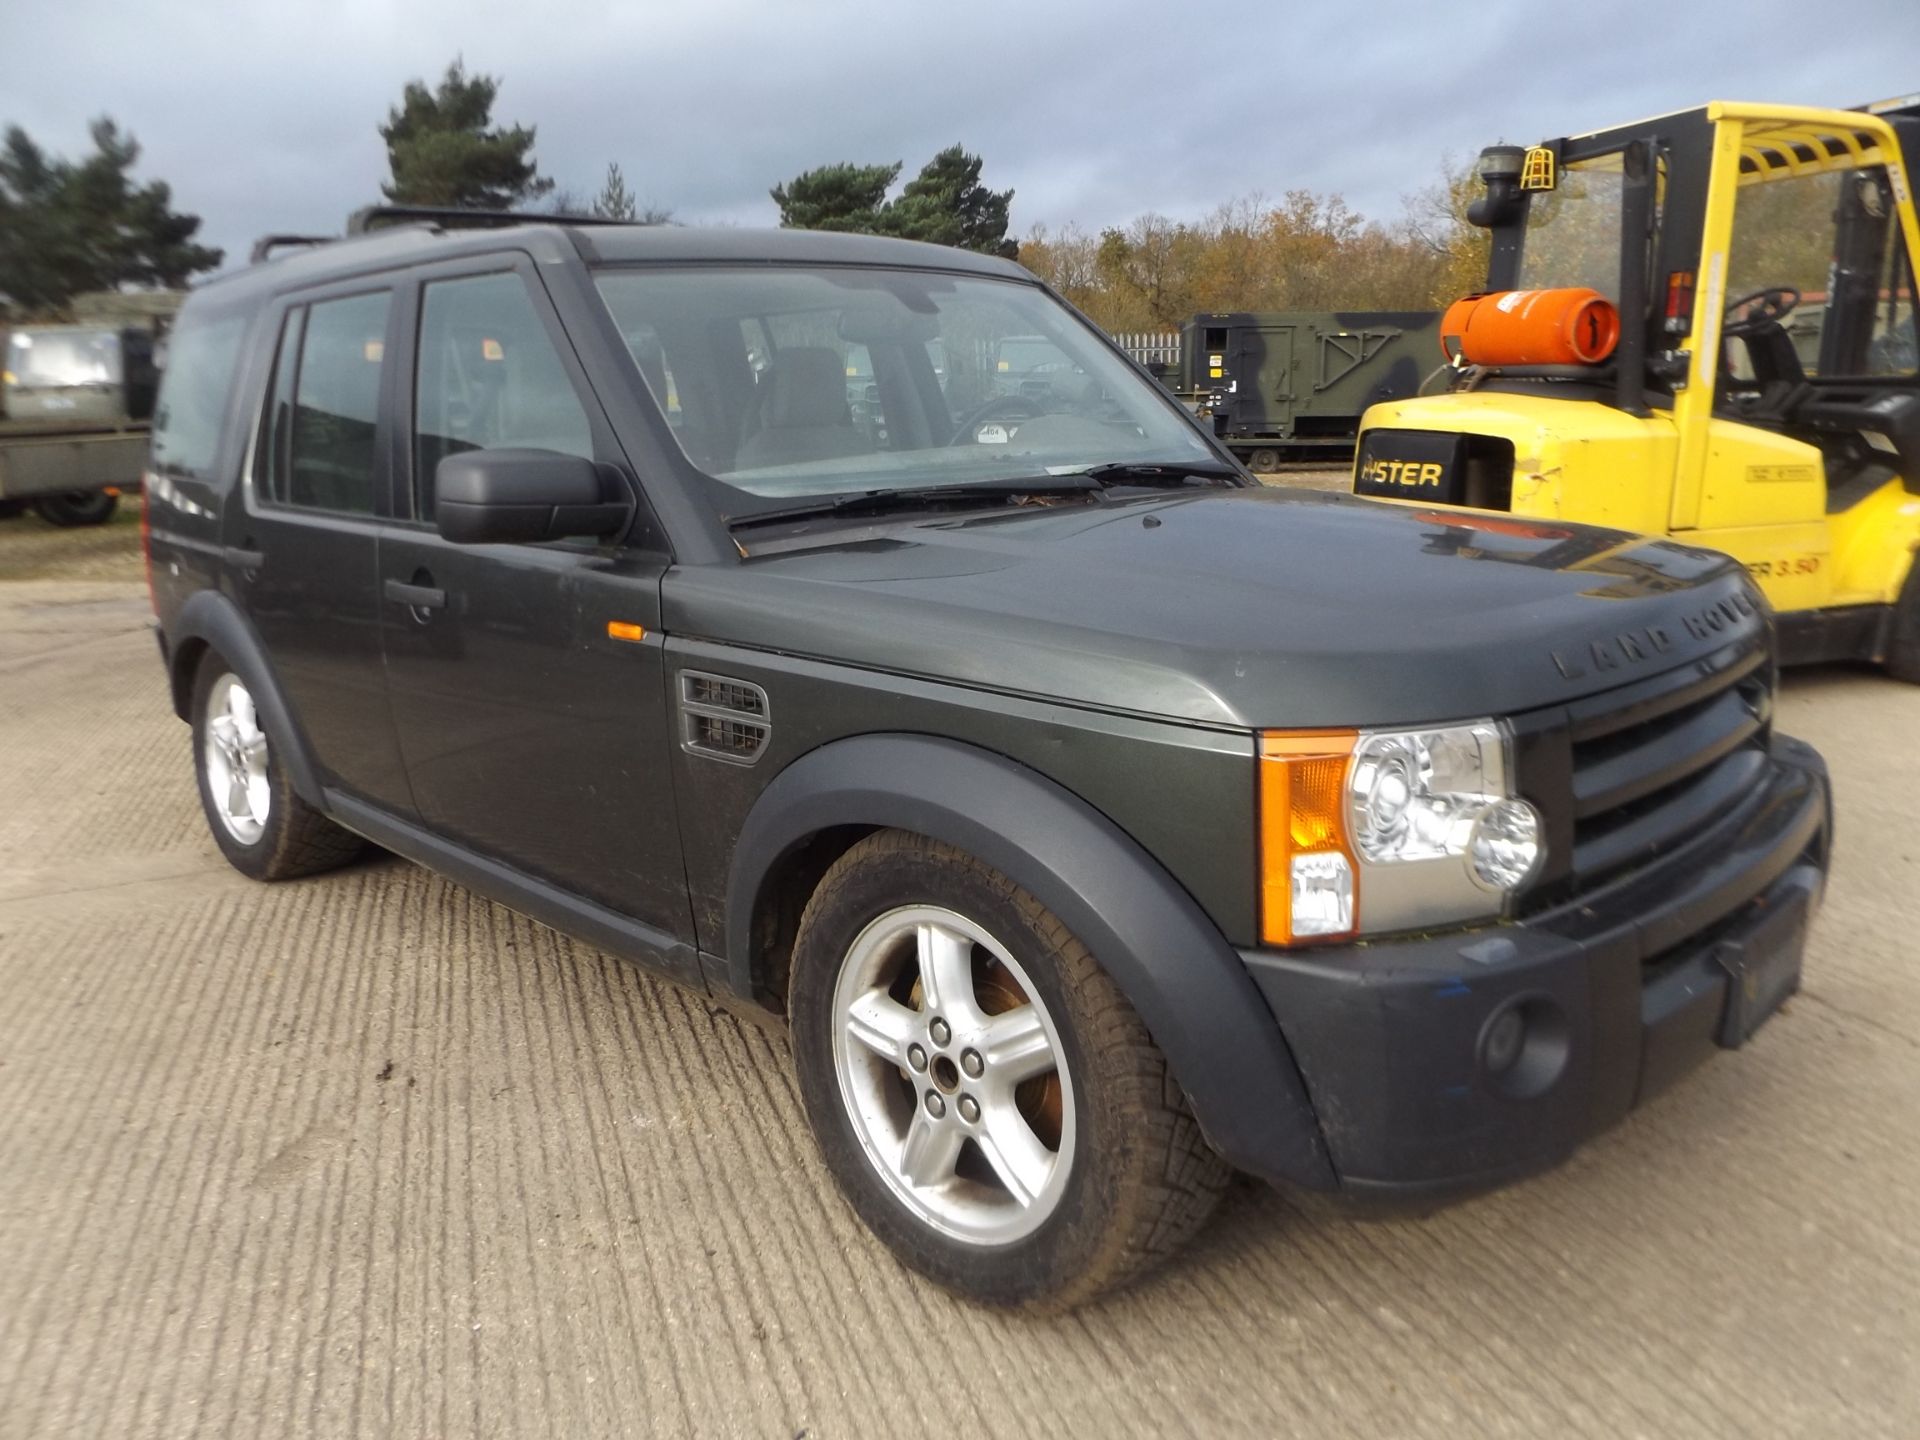 LHD Land Rover Discovery 3 V8 SE Middle East Spec